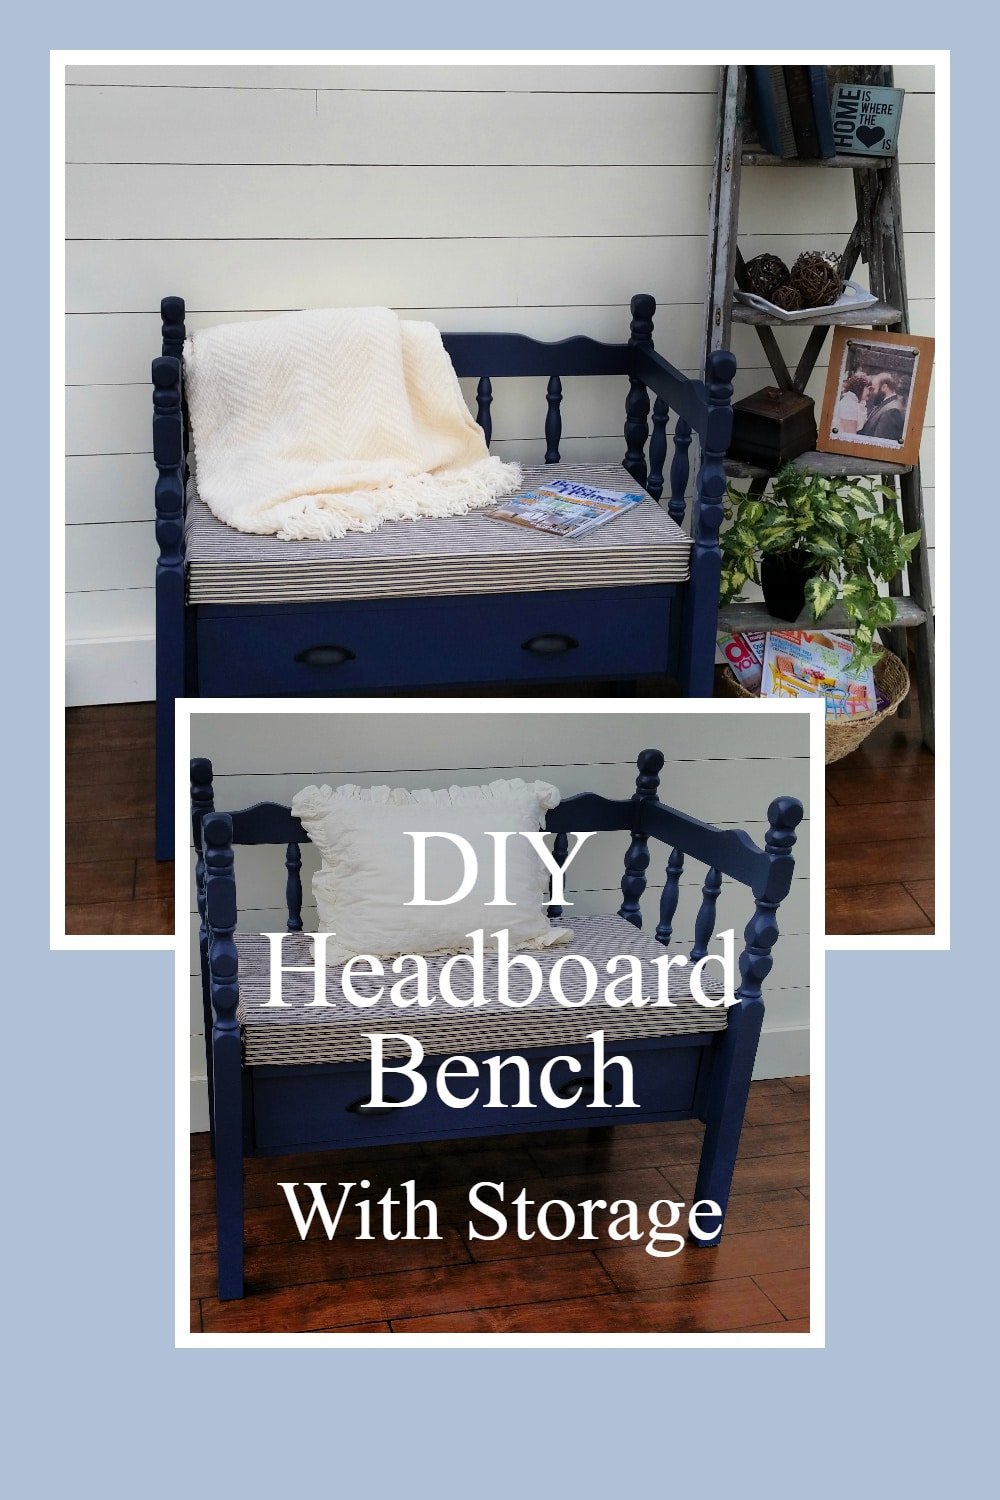 How to make a twin headboard bench with storage. Upcycled headboard and an old drawer joined together into a new useful storage bench. #MyRepurposedLife #upcycle #headboard #bench via @repurposedlife